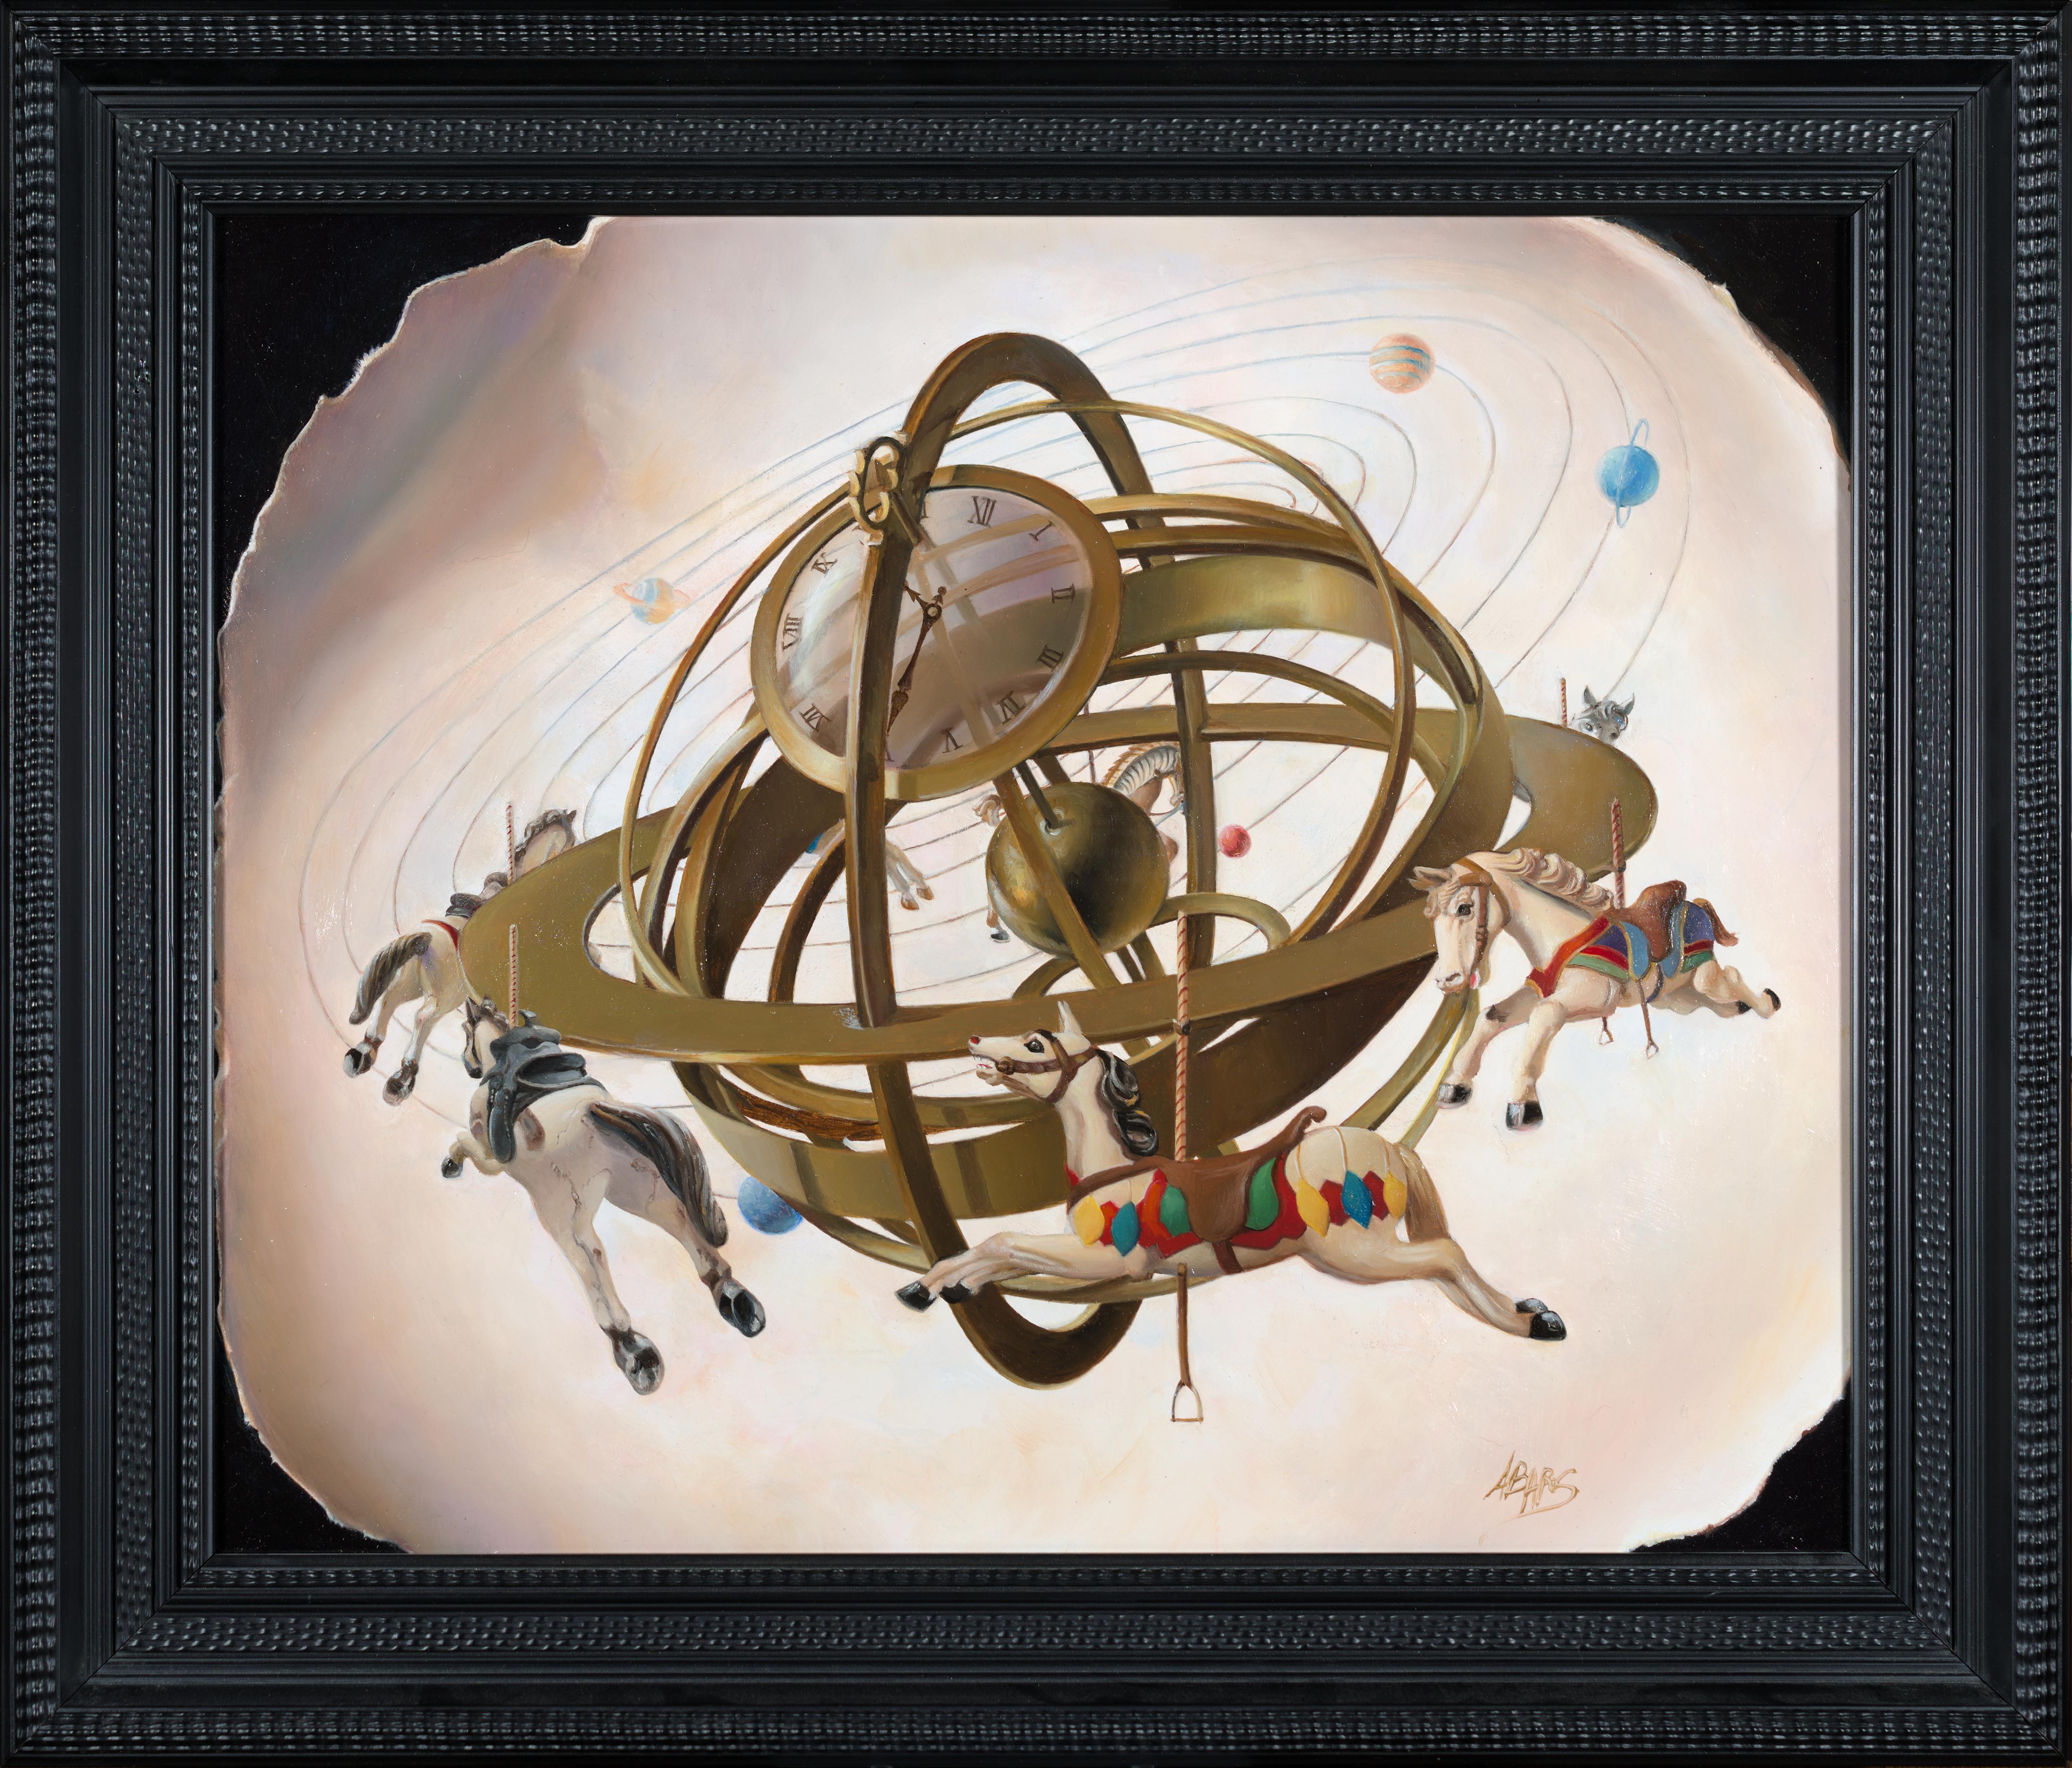 Andrée Bars Still-Life Painting - “Merry-Go-Round”, Carousel Astrolabe Univers&Humanity Symbolist Oil Painting